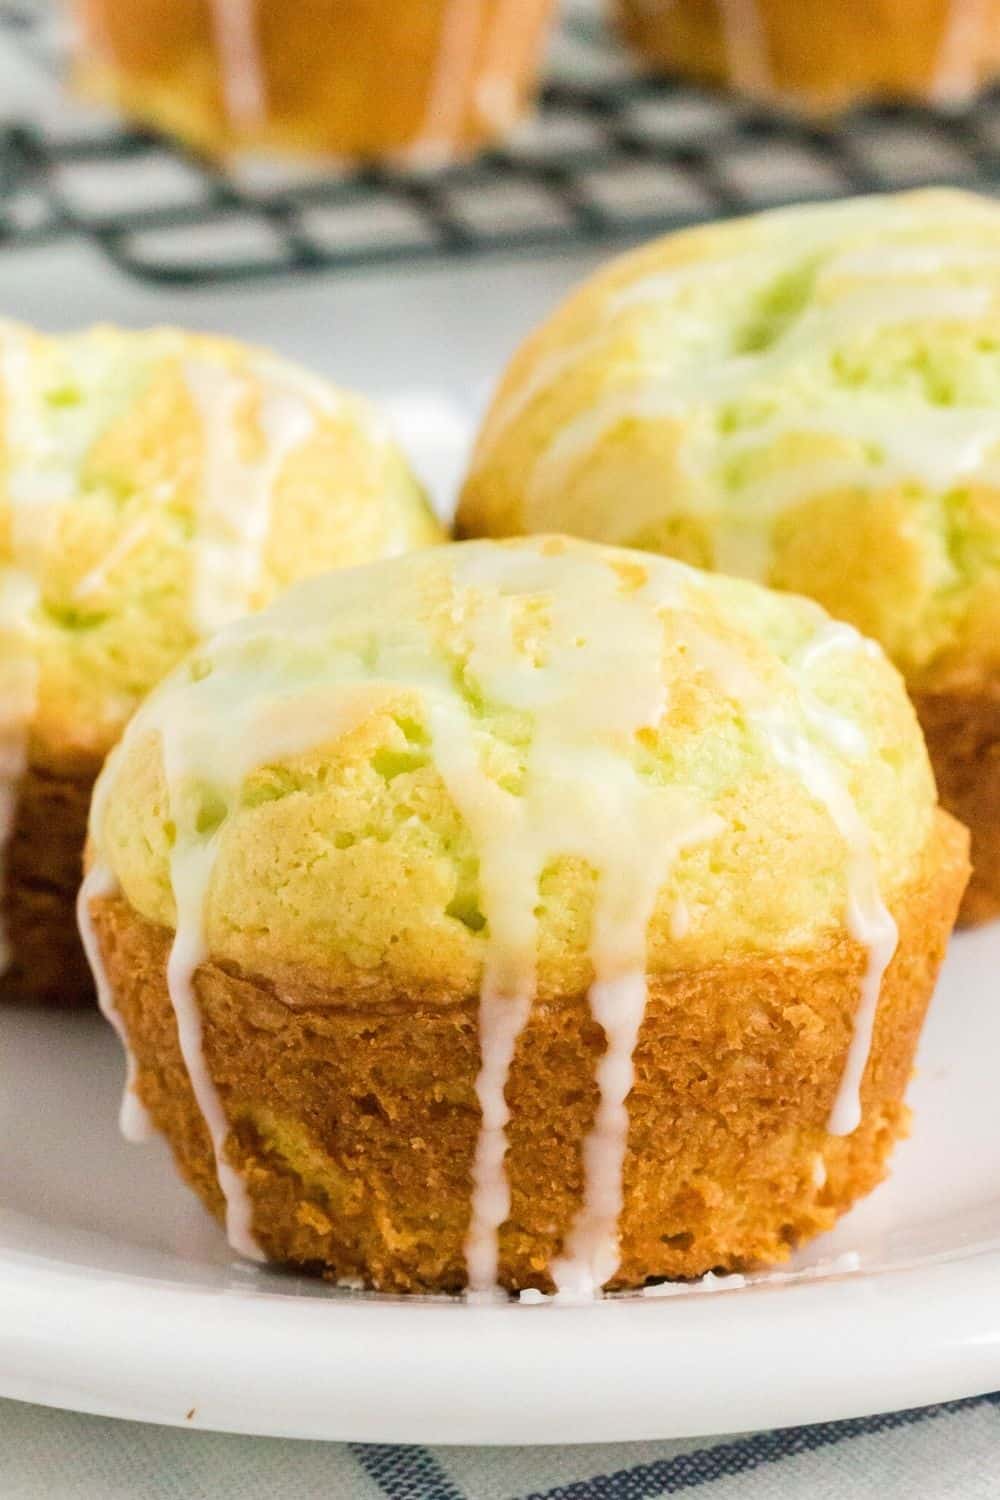 close-up view of a homemade pistachio muffin drizzled with glaze